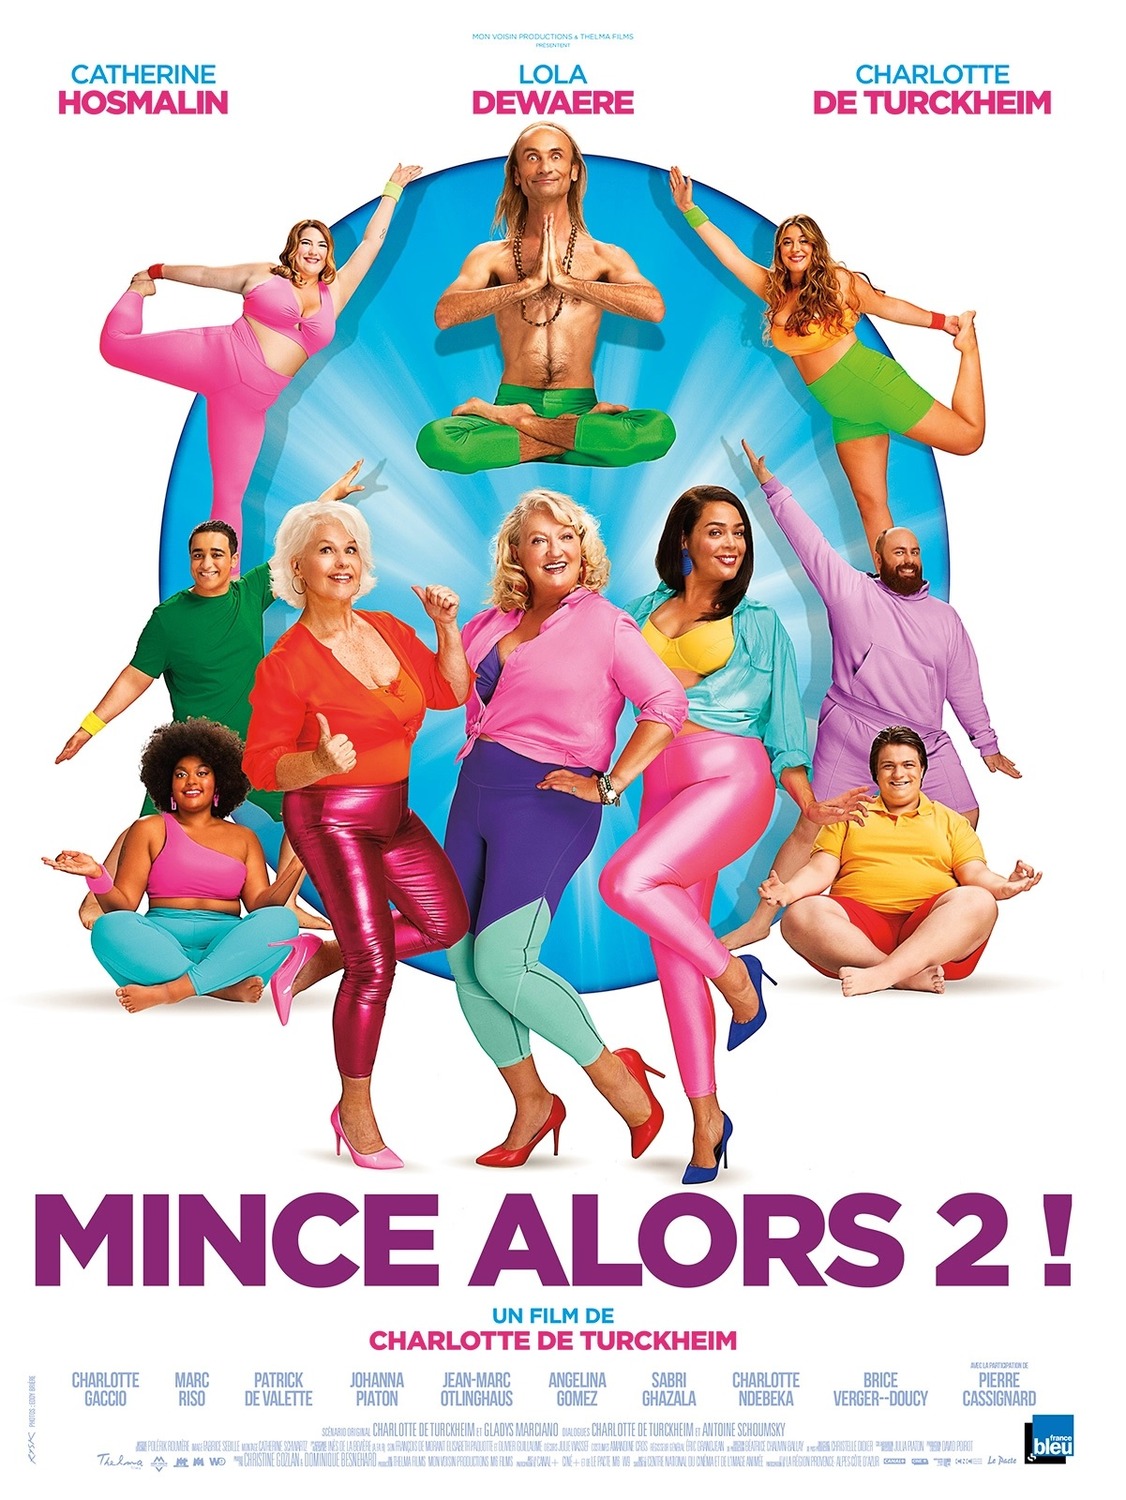 Extra Large Movie Poster Image for Mince alors 2! 